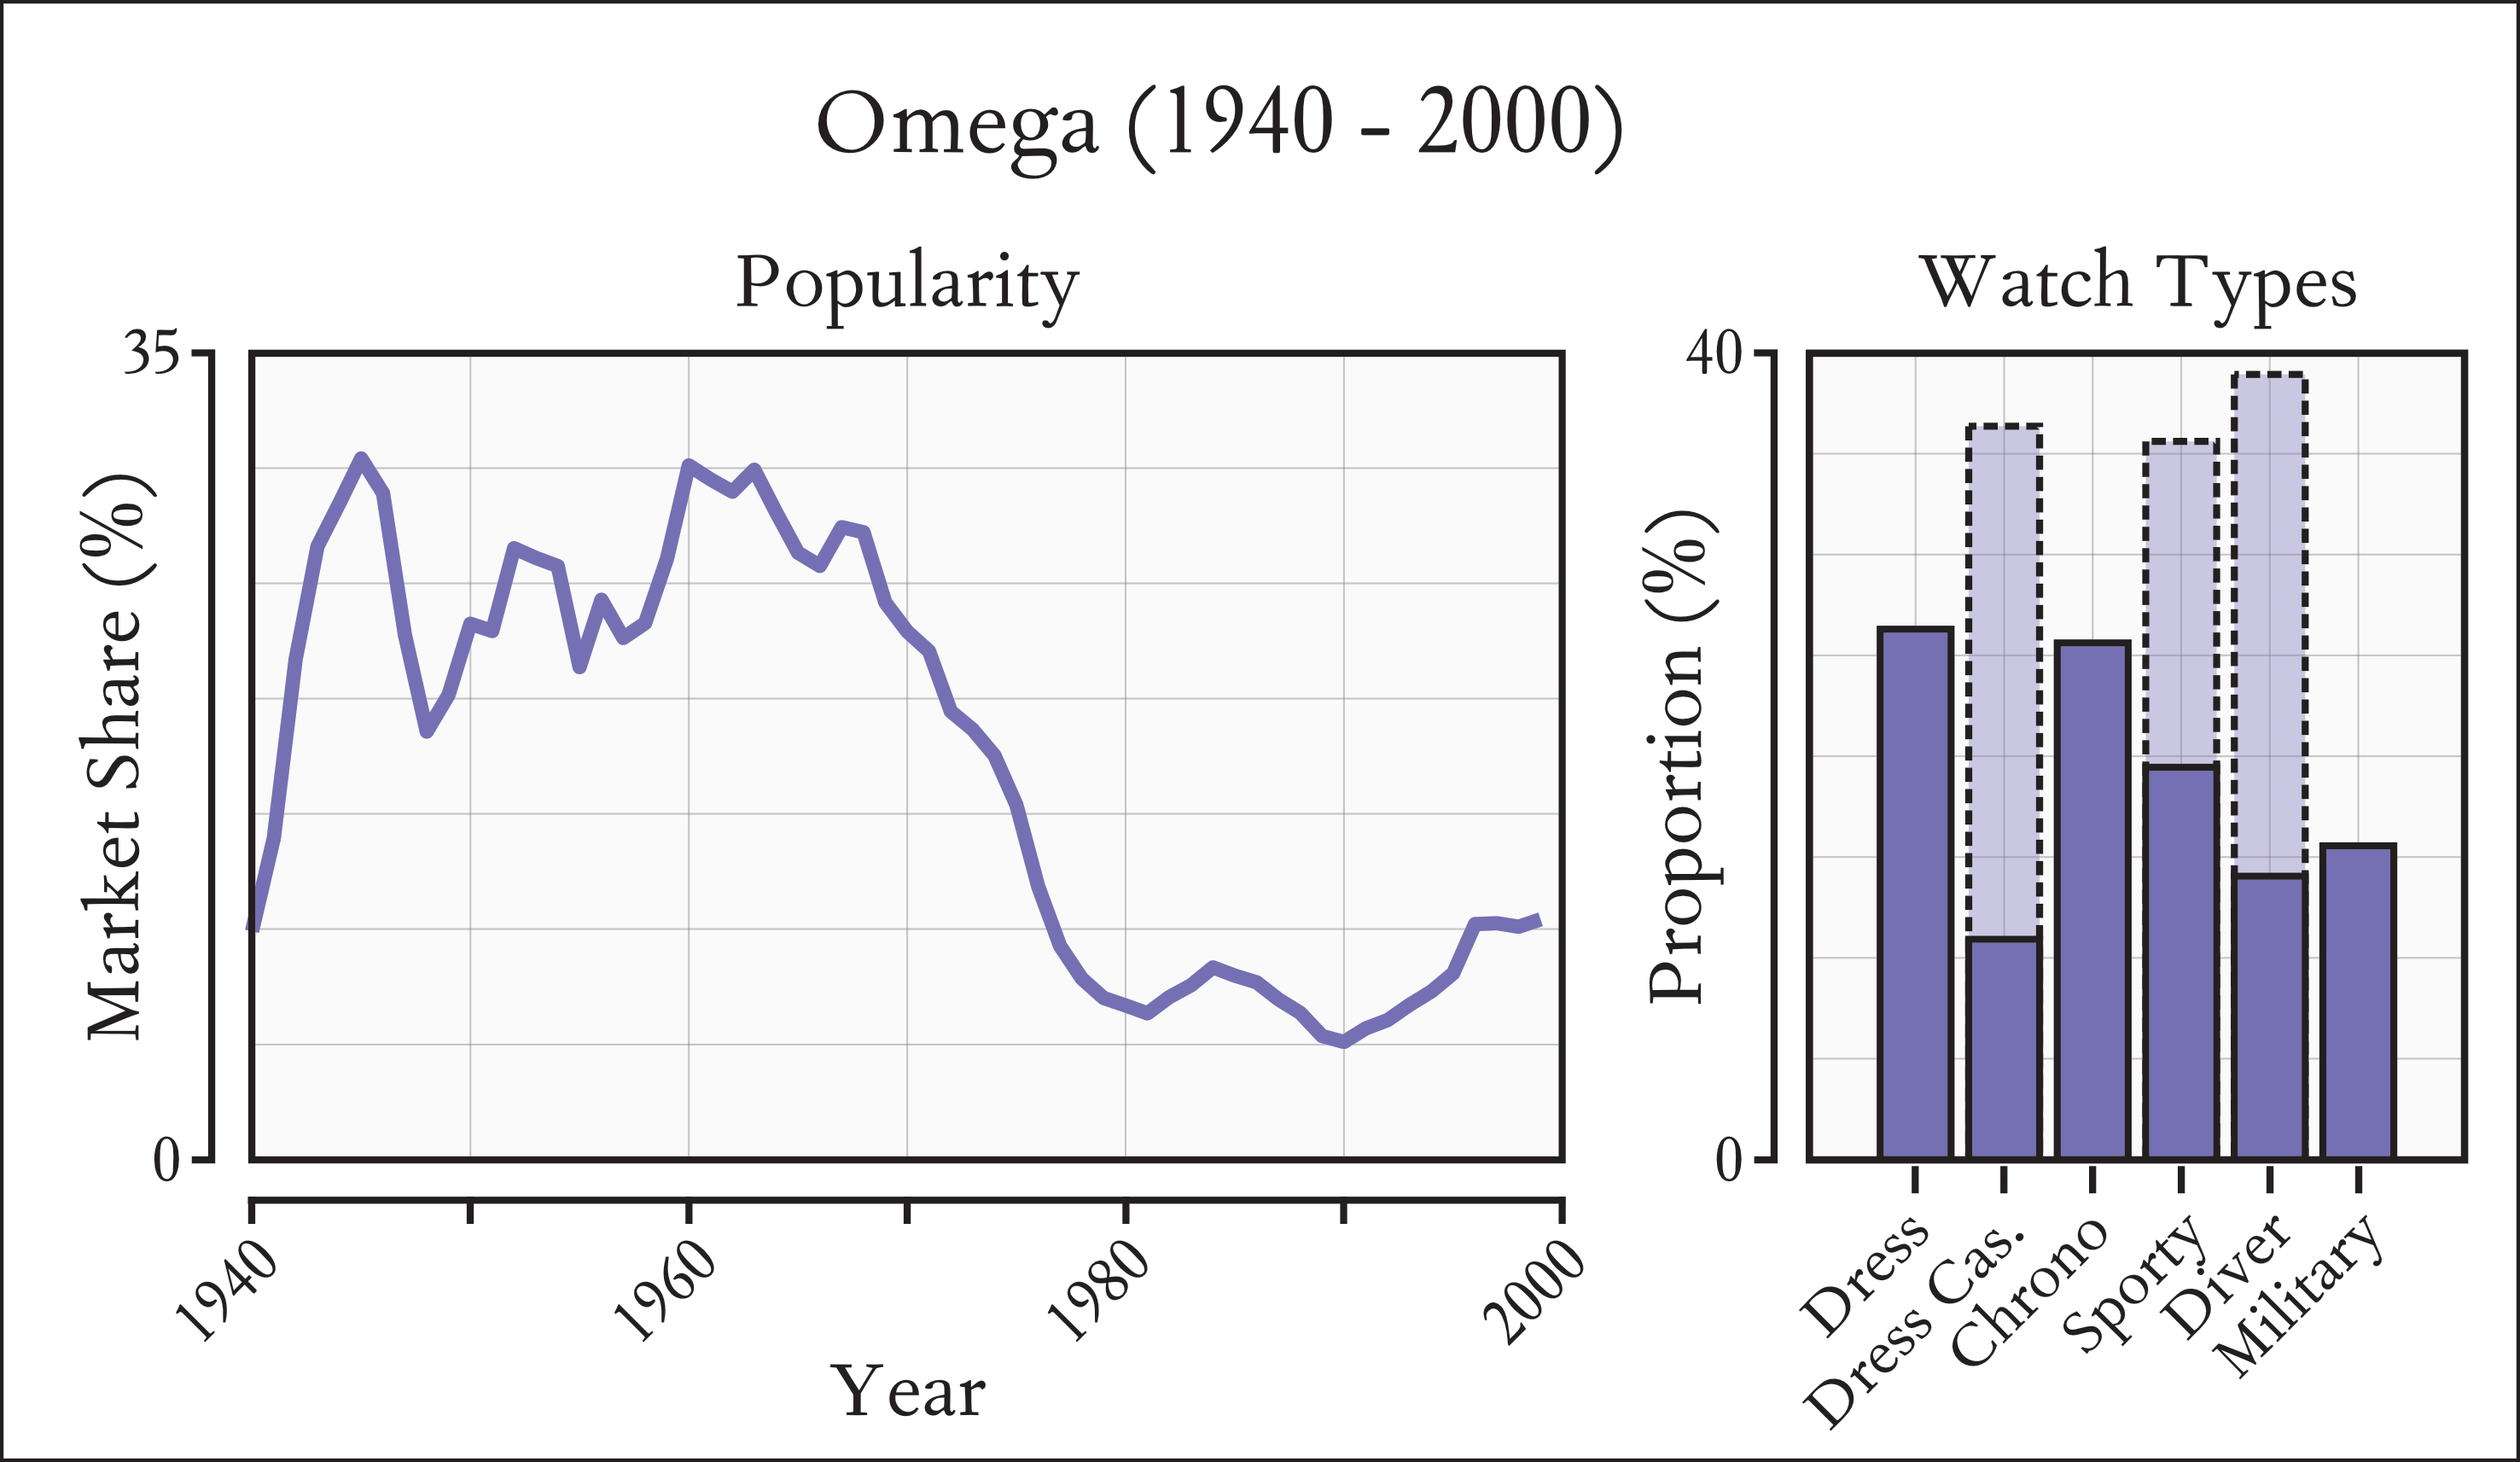 Distribution of Omega popularity between 1940-2000